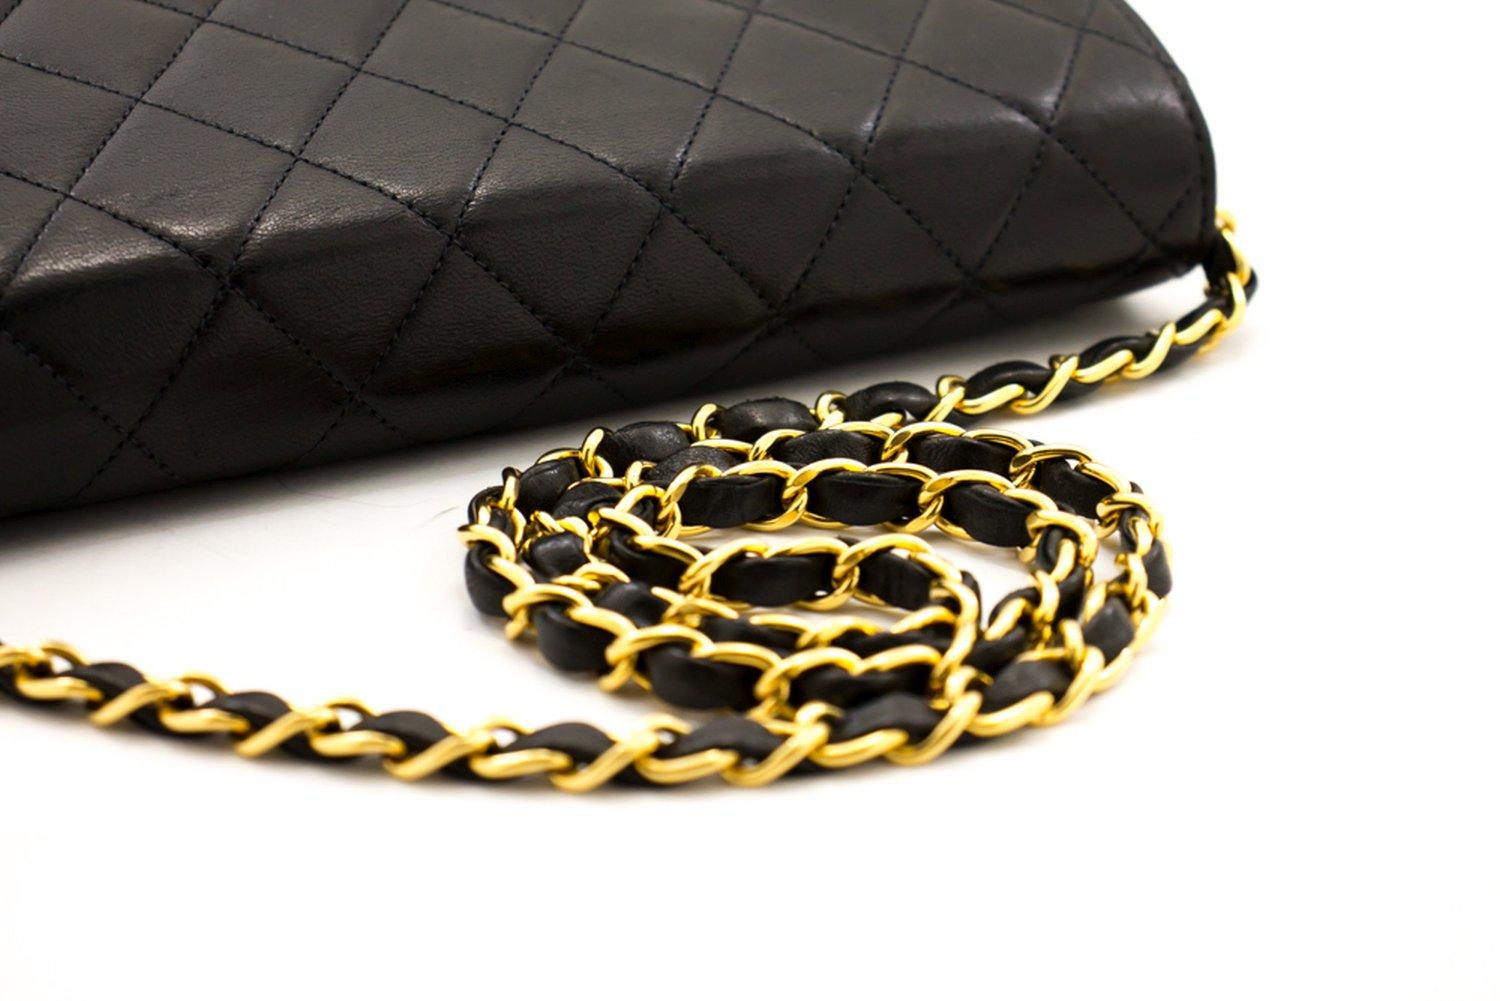 CHANEL Small Chain Shoulder Bag Black Clutch Flap Quilted Lambskin 9